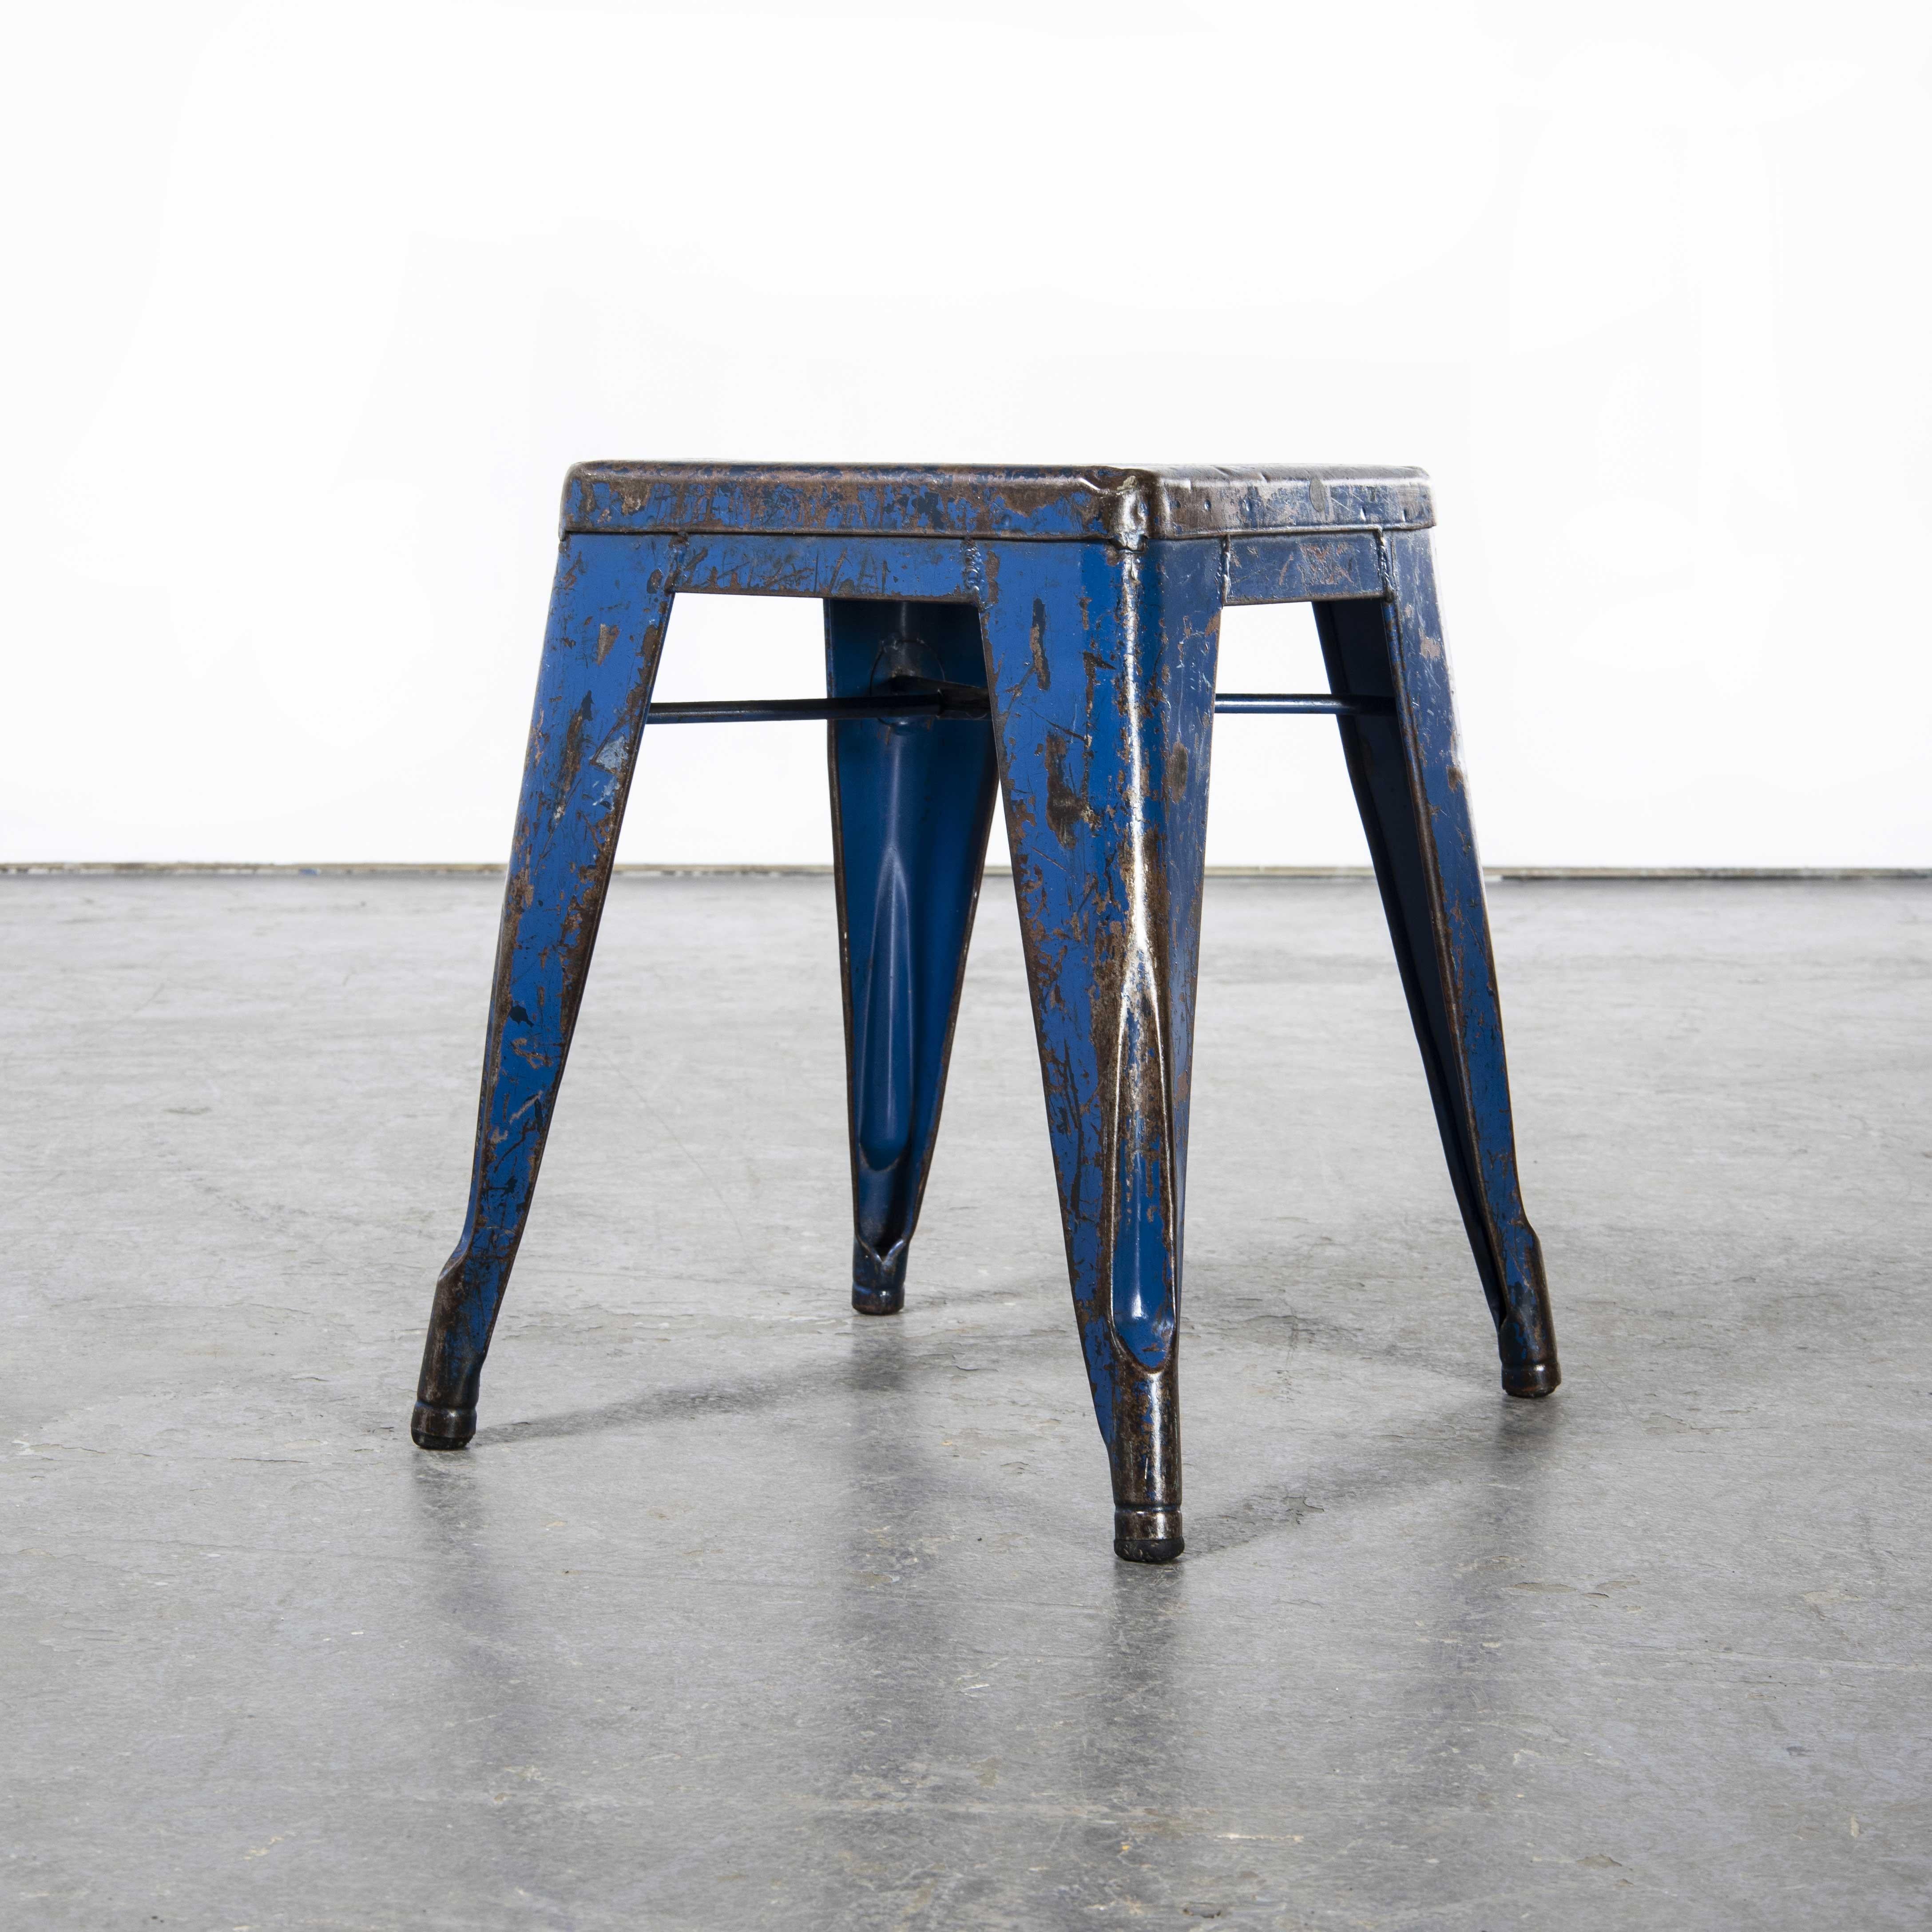 1950’s Original French Tolix H Metal Caf? Dining Stools Blue – Pair

1950’s Original French Tolix H Metal Caf? Dining Stools Blue – Pair. Tolix is one of our all time favourite companies. In 1907 Frenchman Xavier Pauchard discovered that he could